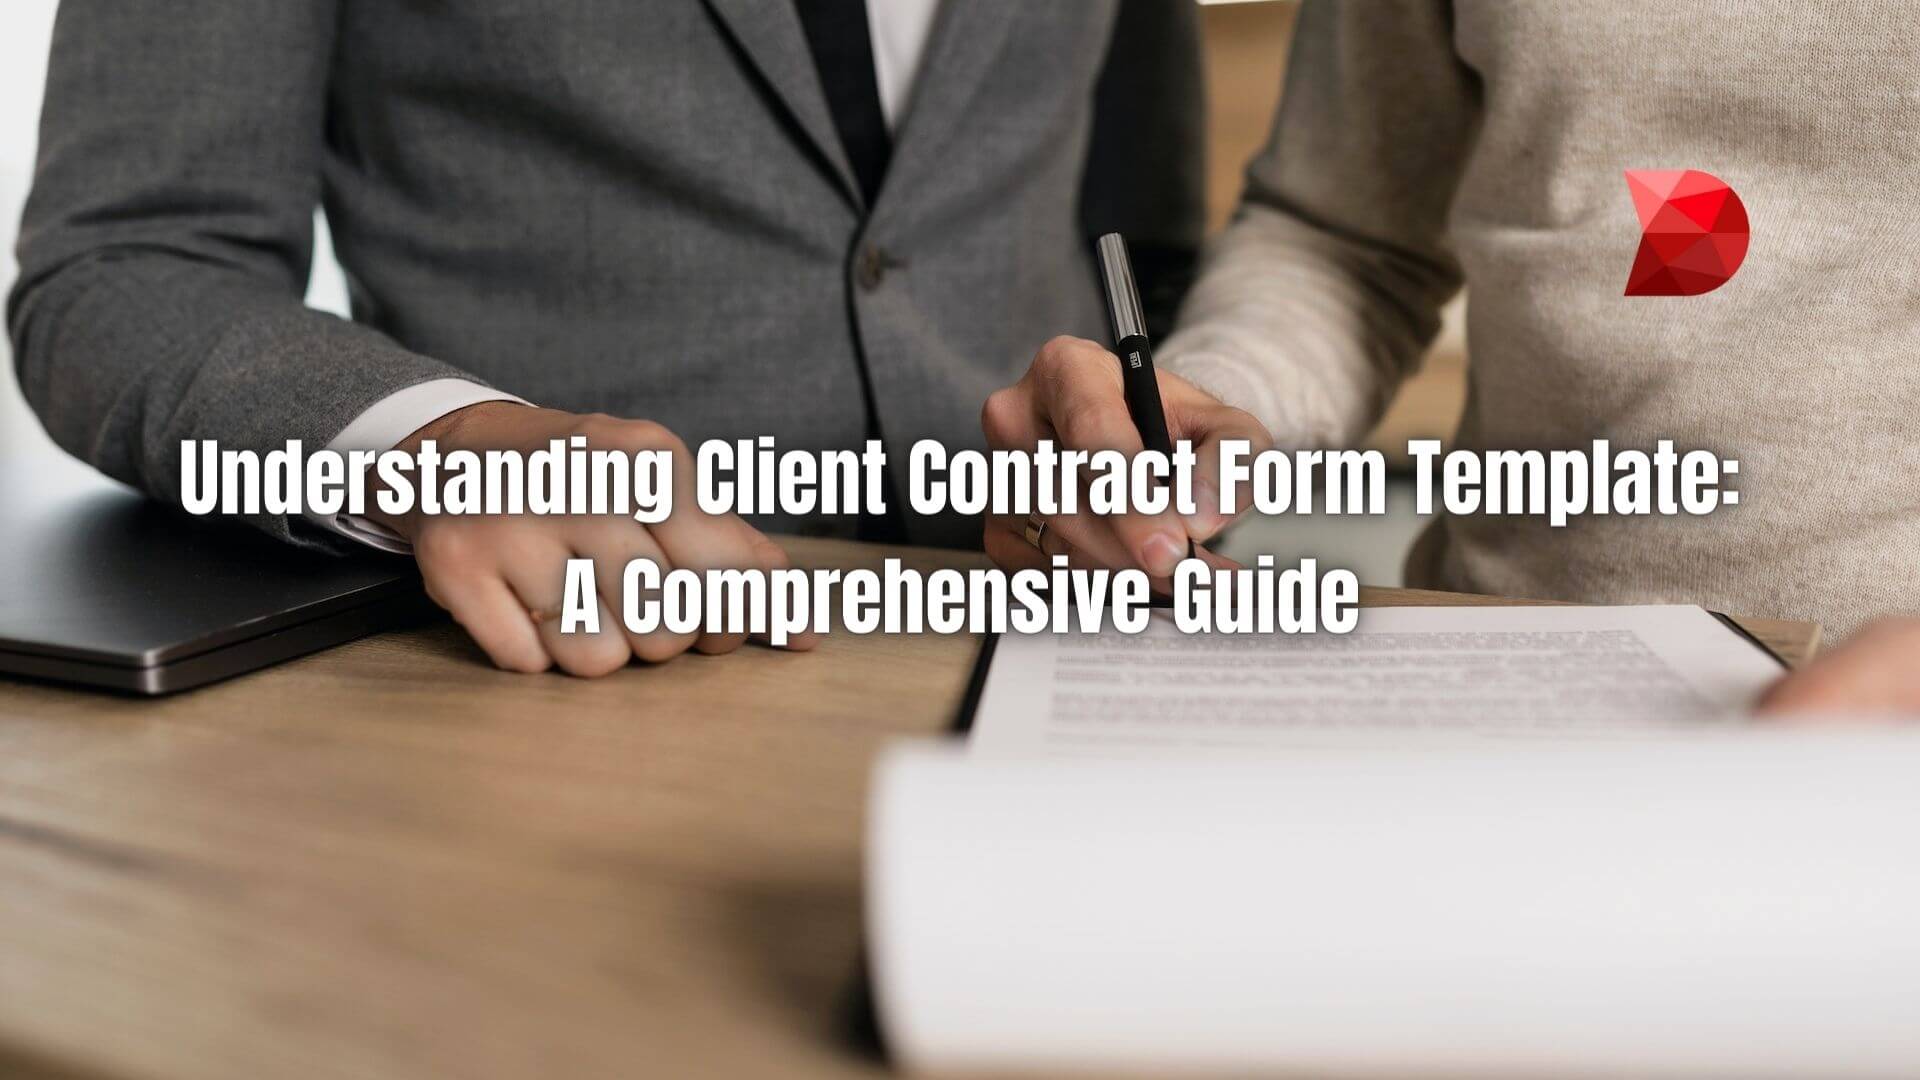 A Client Contract Form Template is essential in any professional setting where services or products are exchanged for a fee. Learn why!